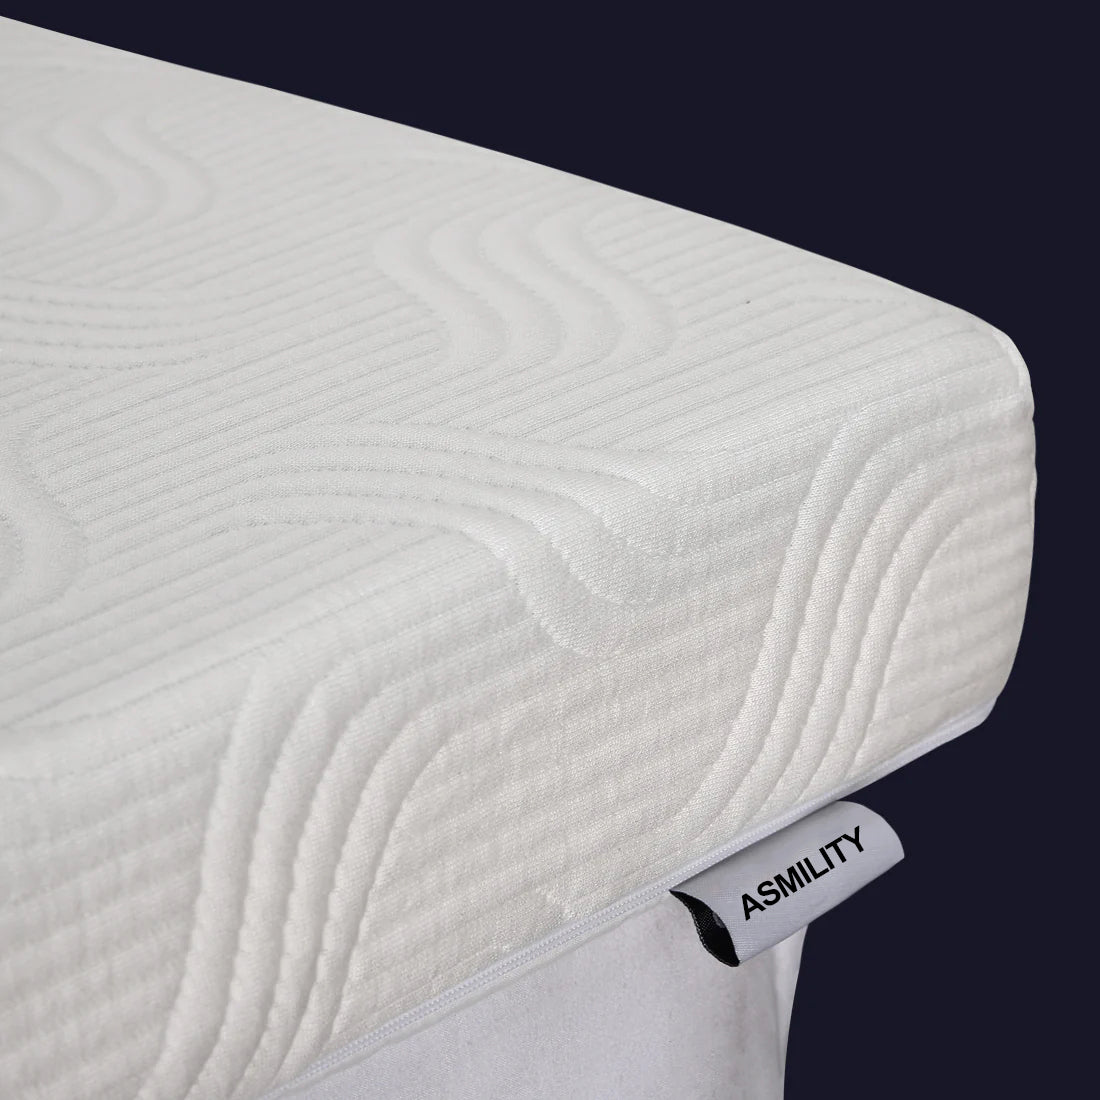 ASMILITY 3 Inch Memory Foam Mattress Topper, Cooling Relieving Mattres